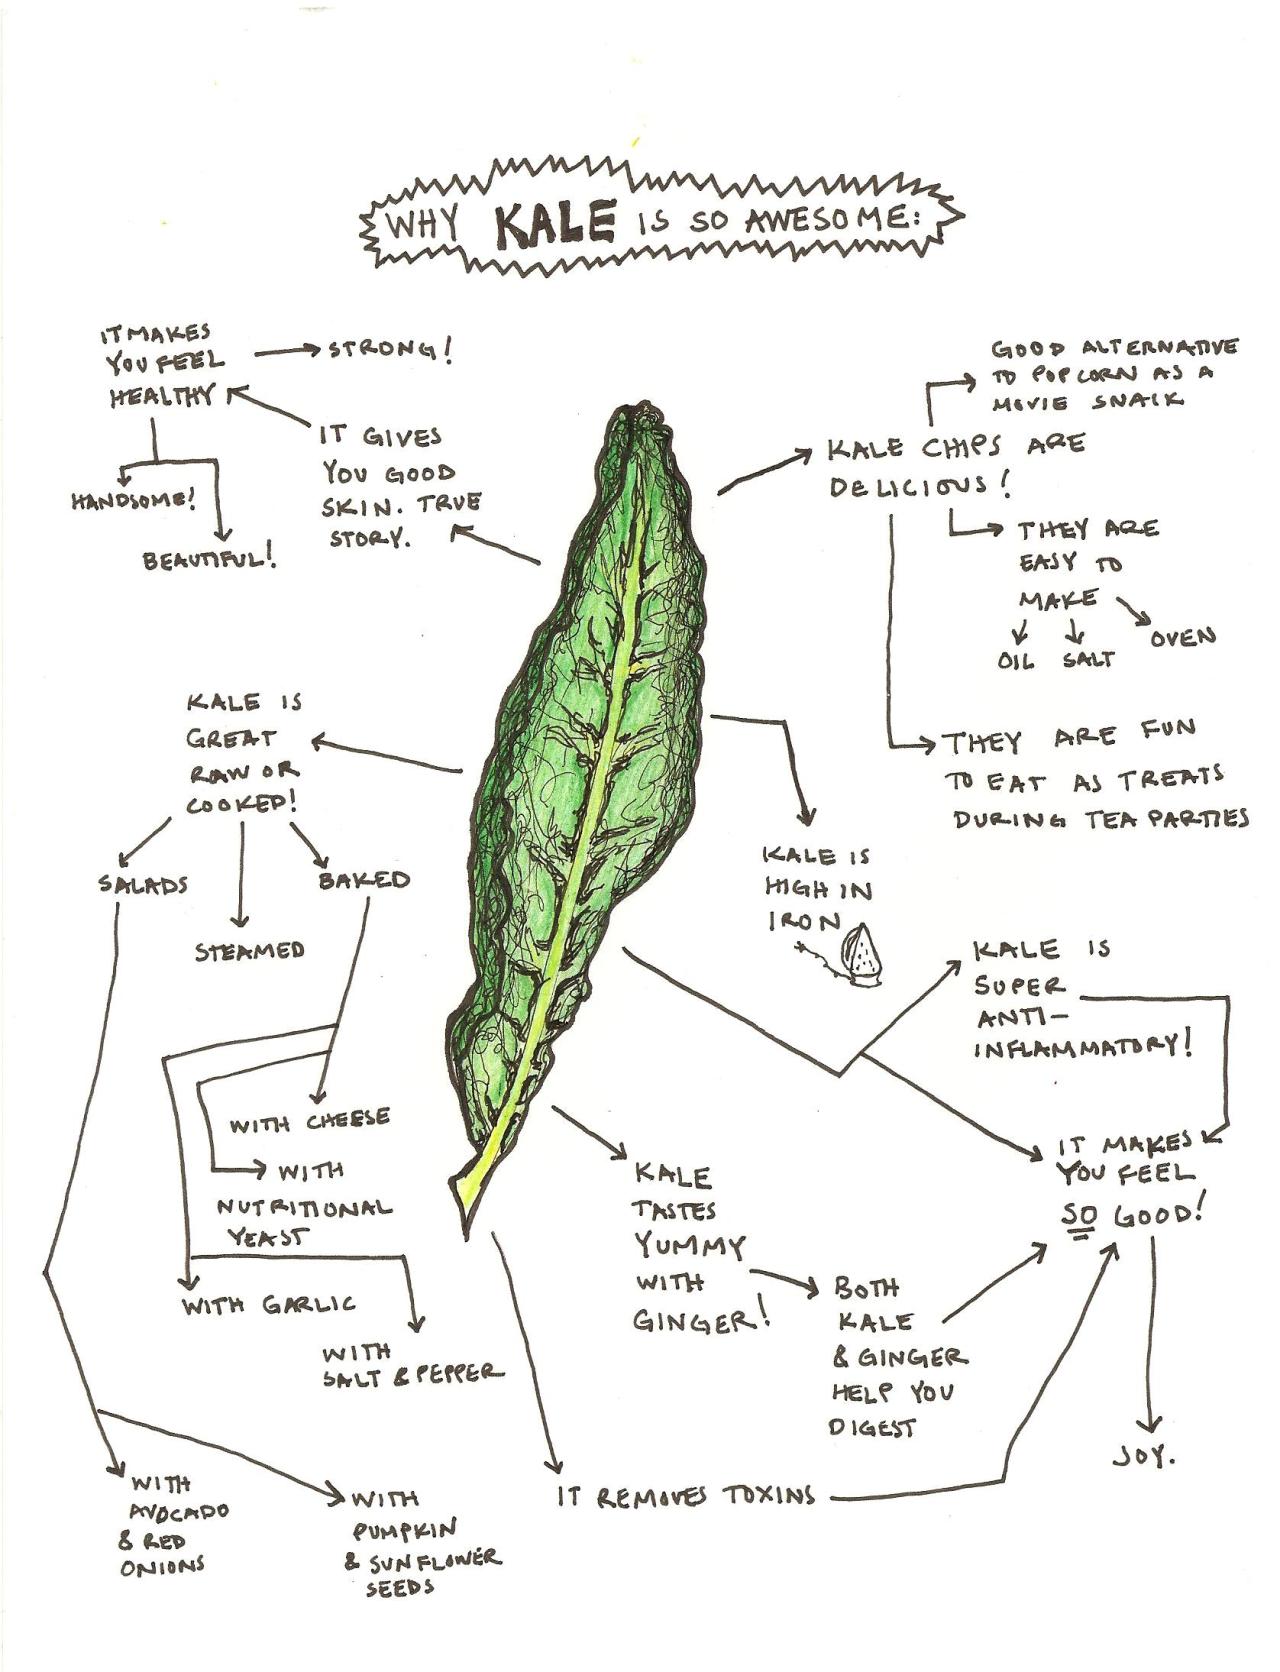 Mind Map #56: [Why Kale is so awesome:]
https://www.facebook.com/thisfoldedmind